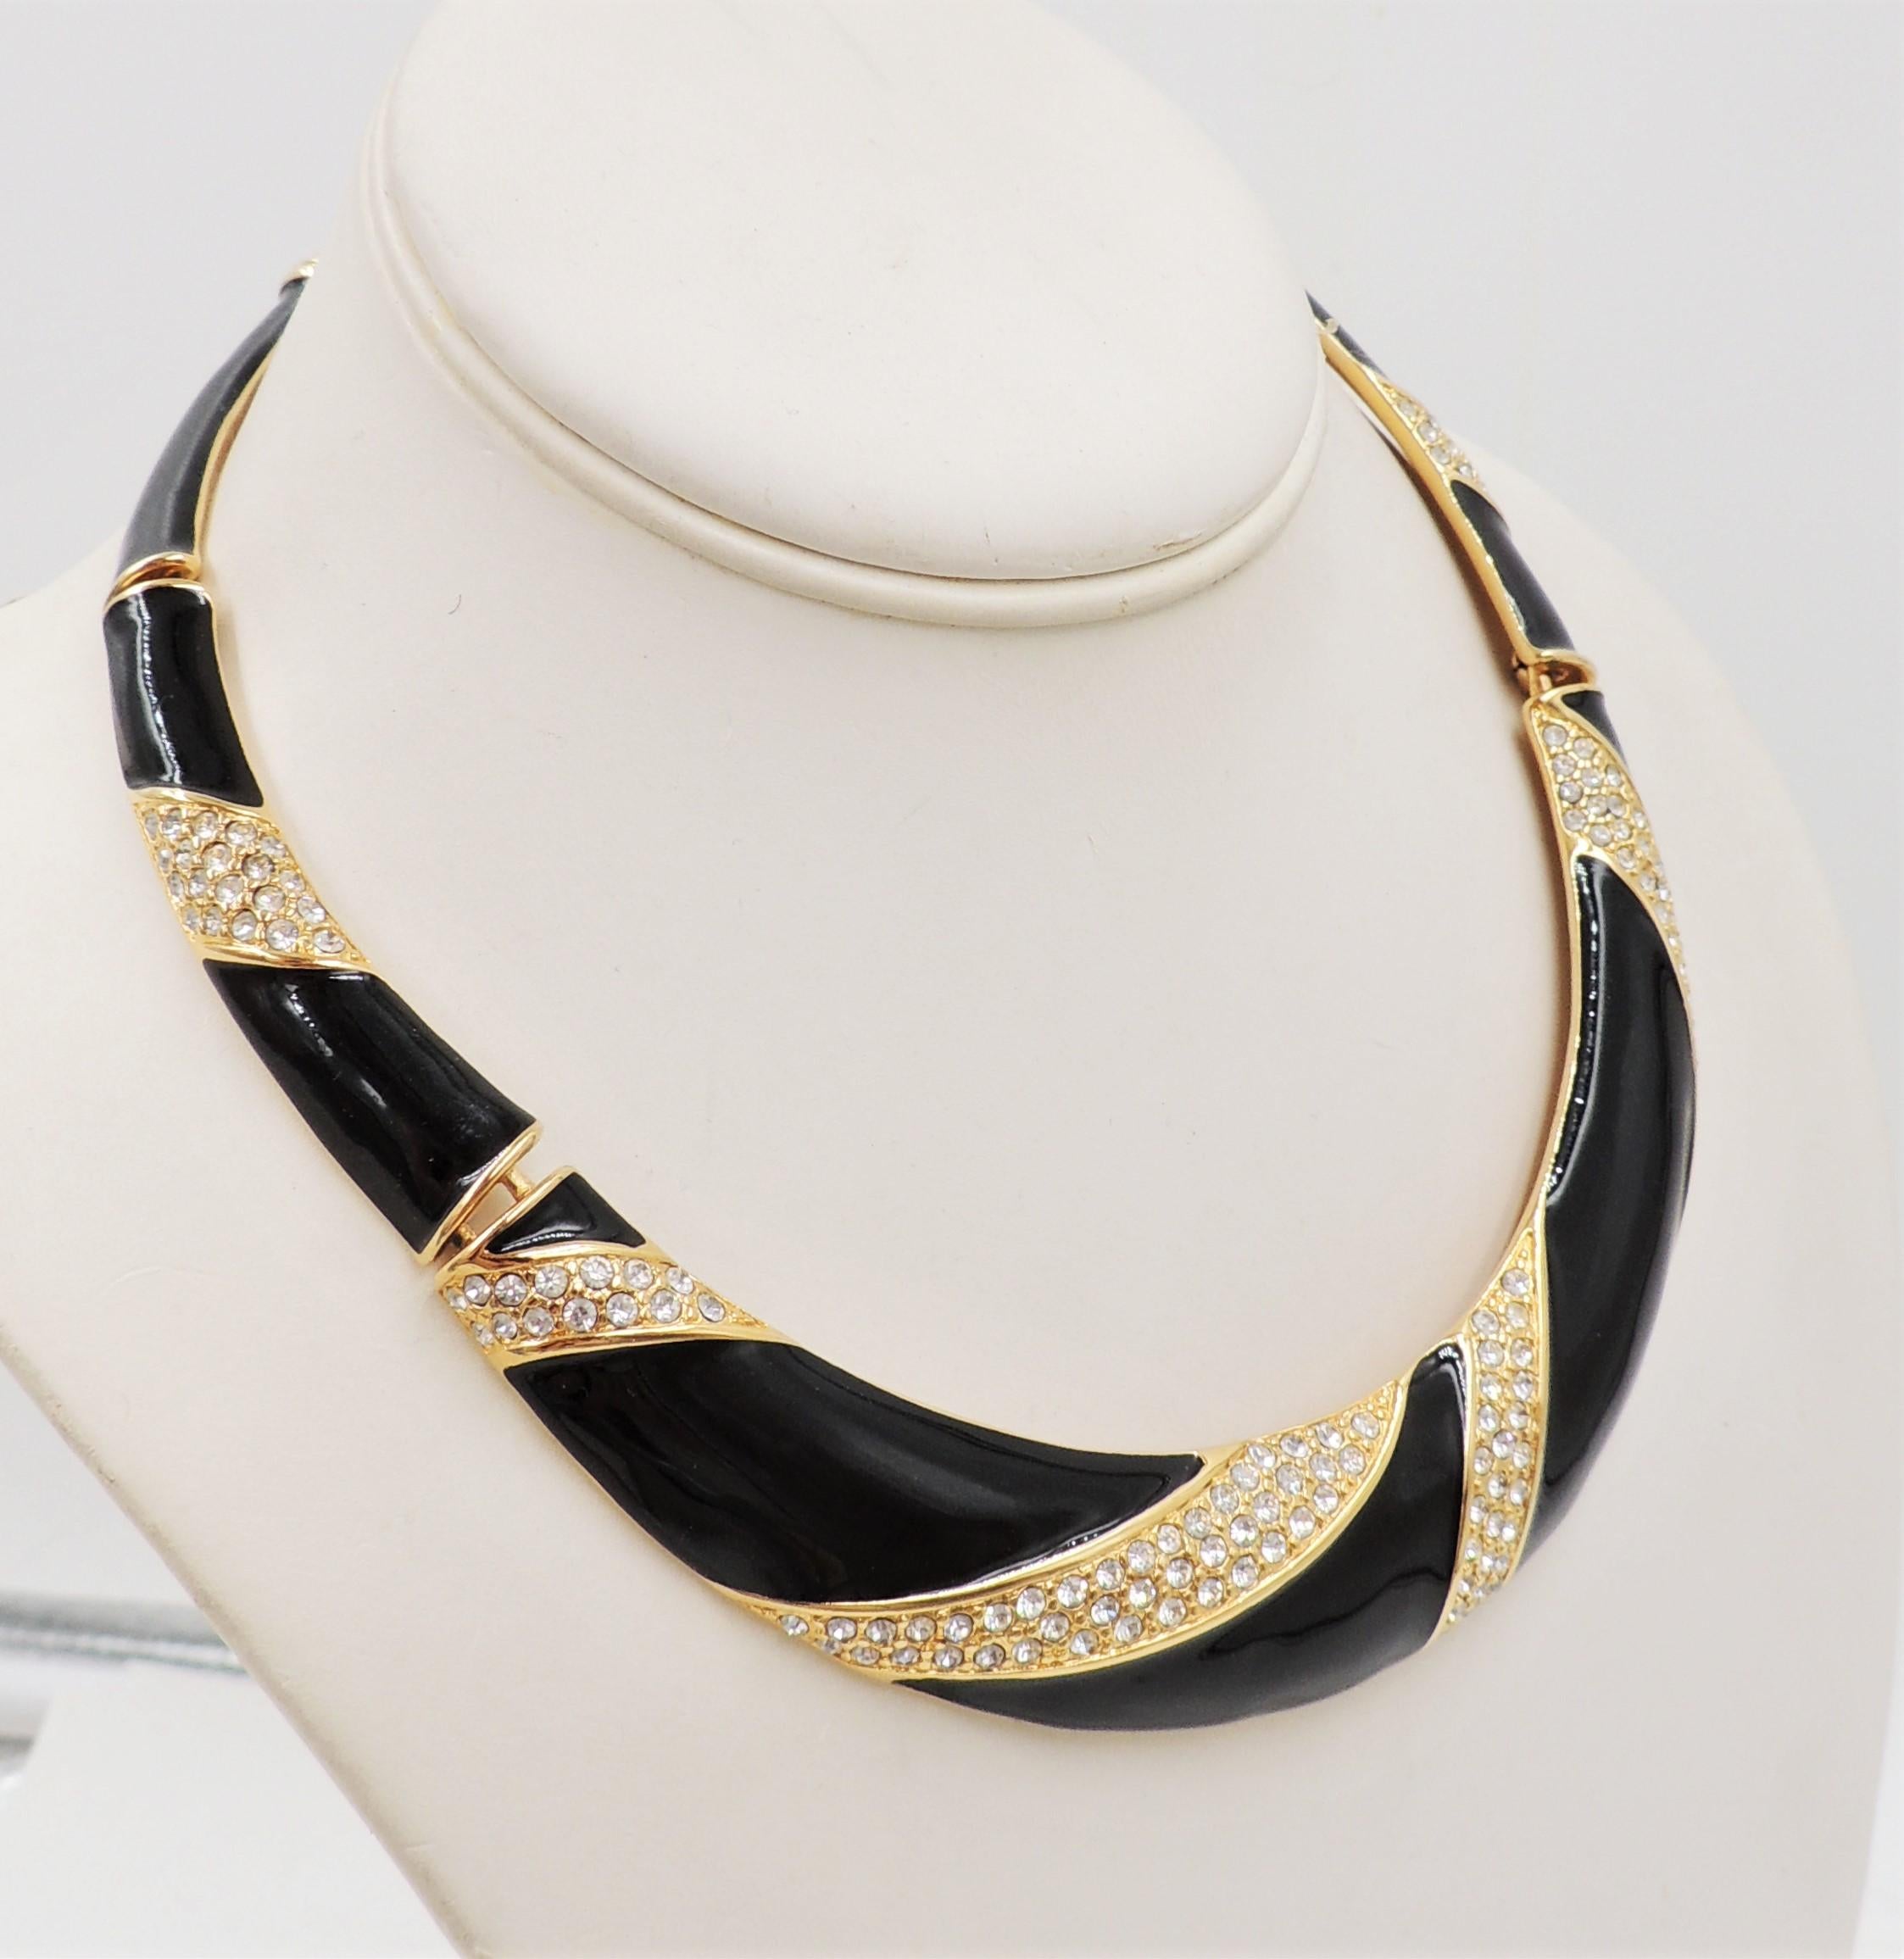 Vintage Signed Monet Black Enamel & Pave Clear Rhinestone Necklace 1987 Ad Piece In Excellent Condition For Sale In Easton, PA